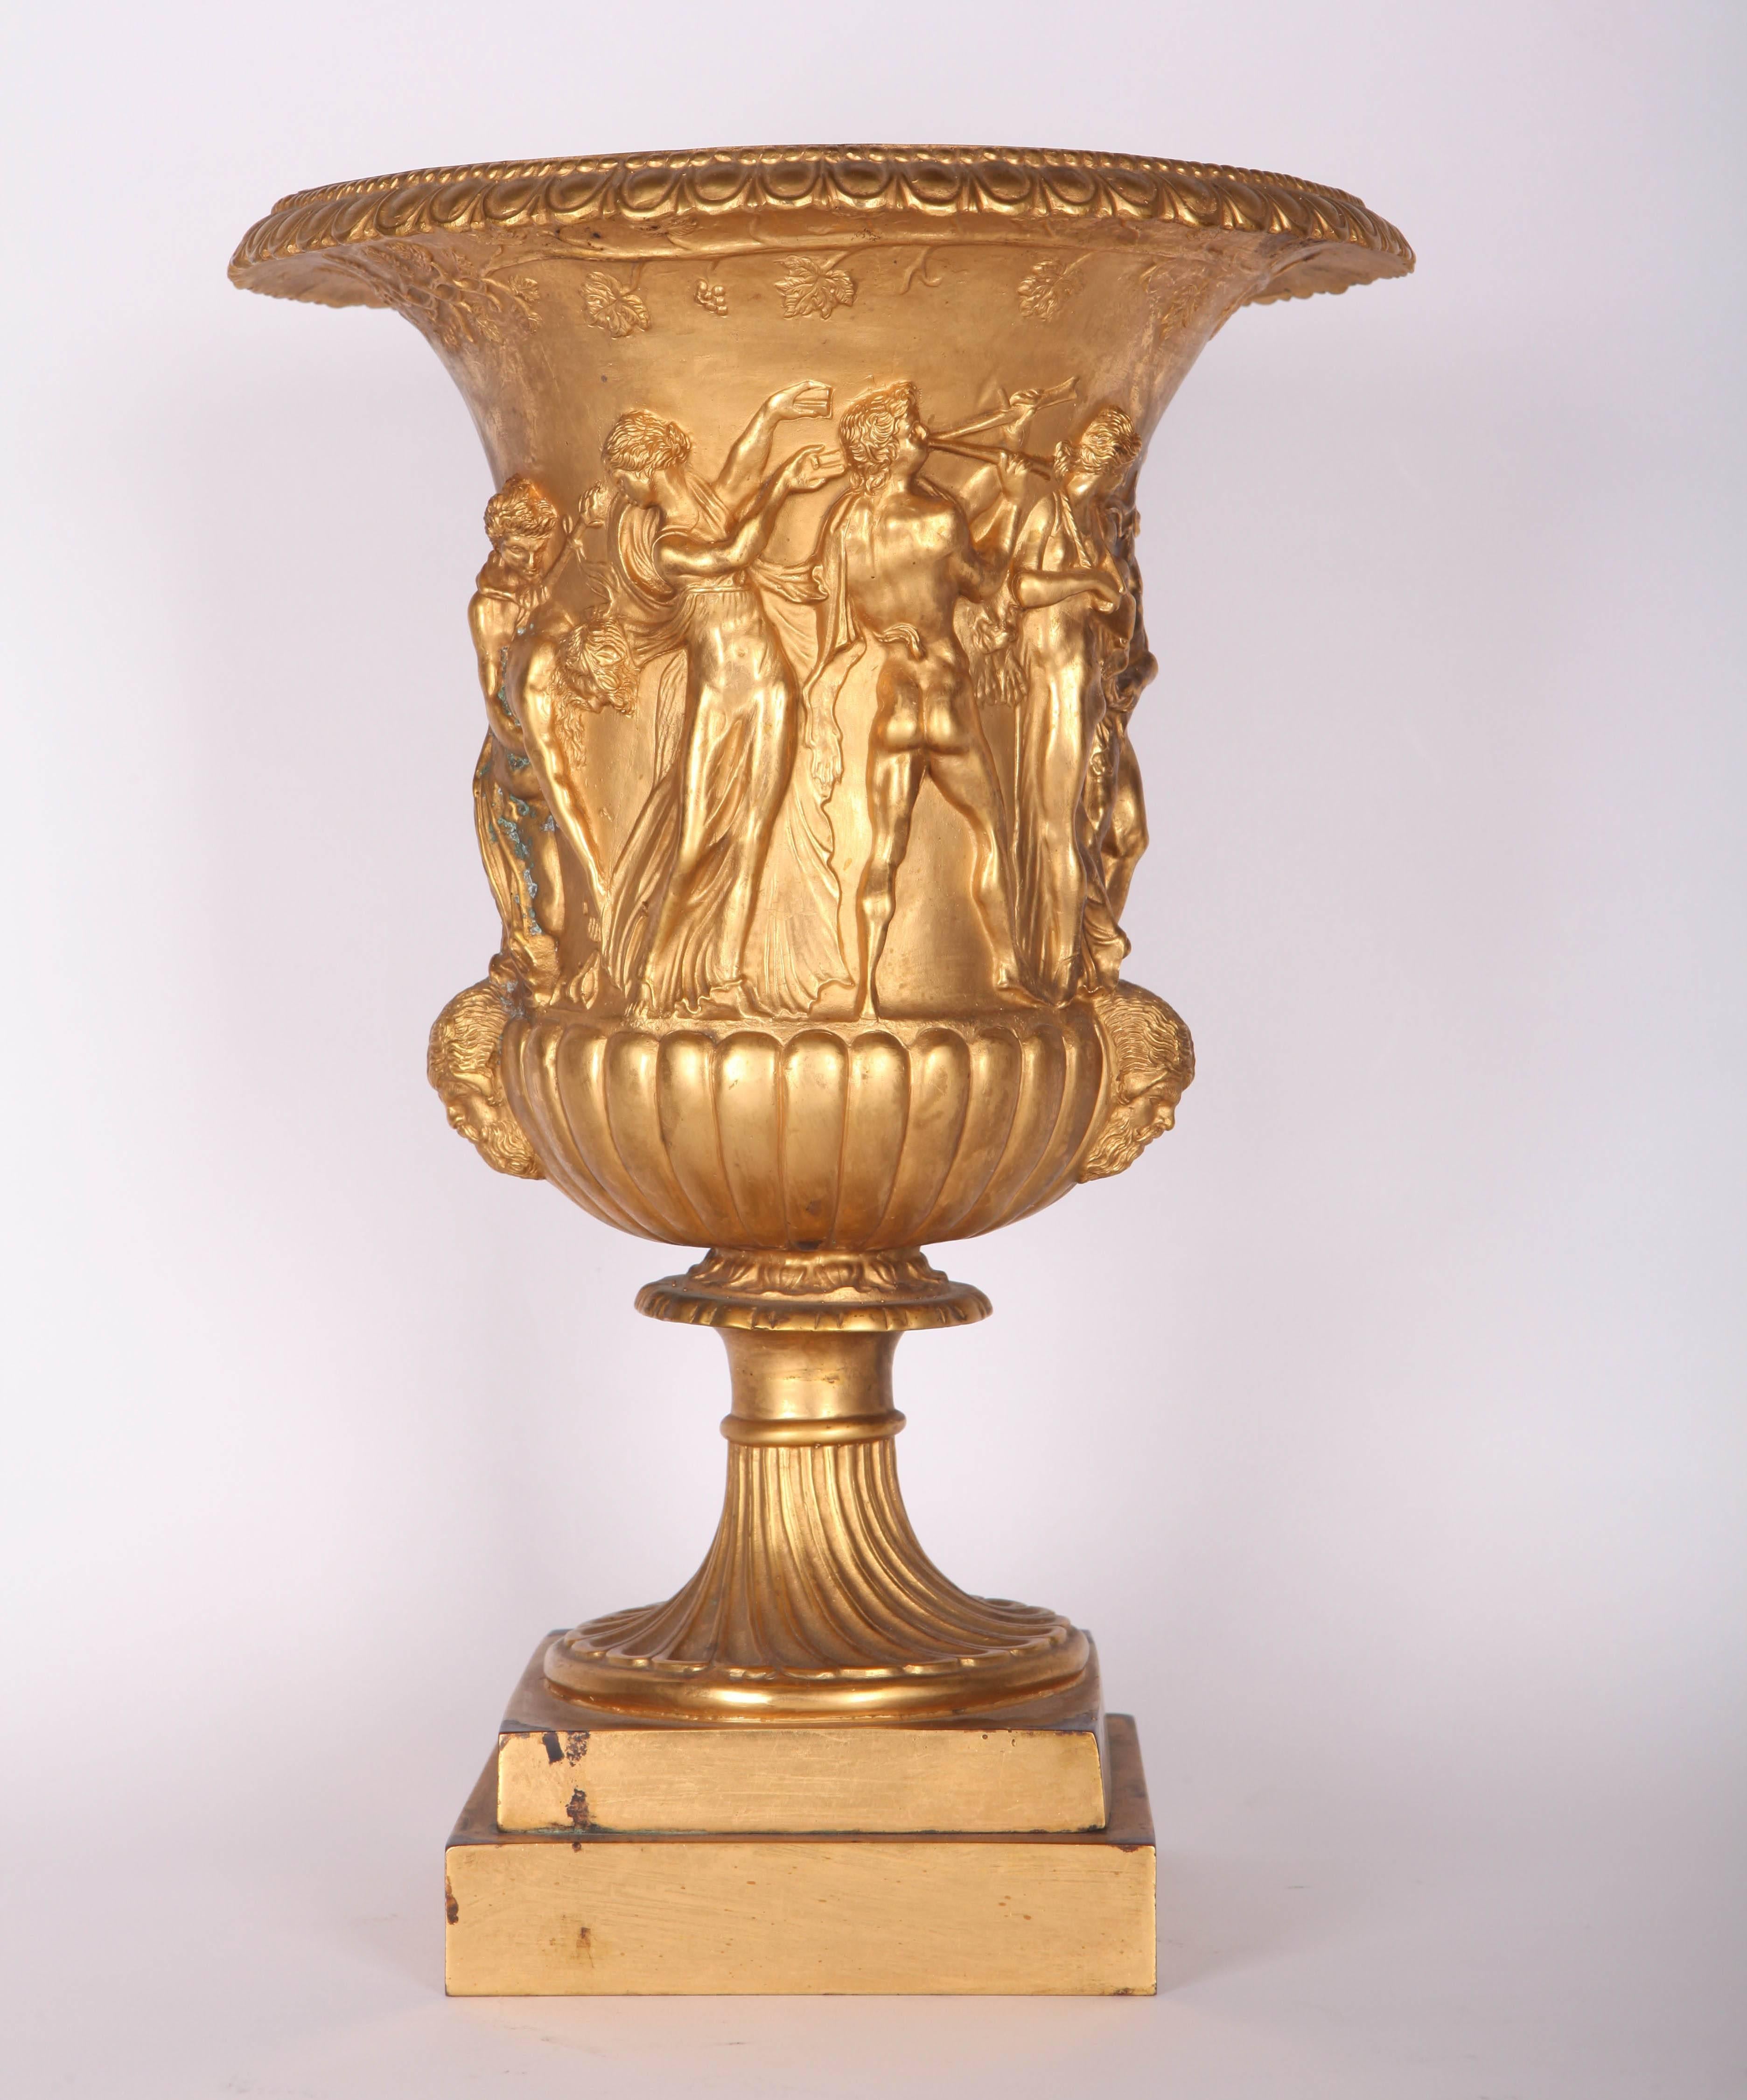 This urn is a 19th century reproduction from the Borghese Vase today at the Musée du Louvre.

The original, of monumental size, is carved in marble and was made in the 1st century BC. Bought in 1566 by the Borghese family in Rome, it was bought by